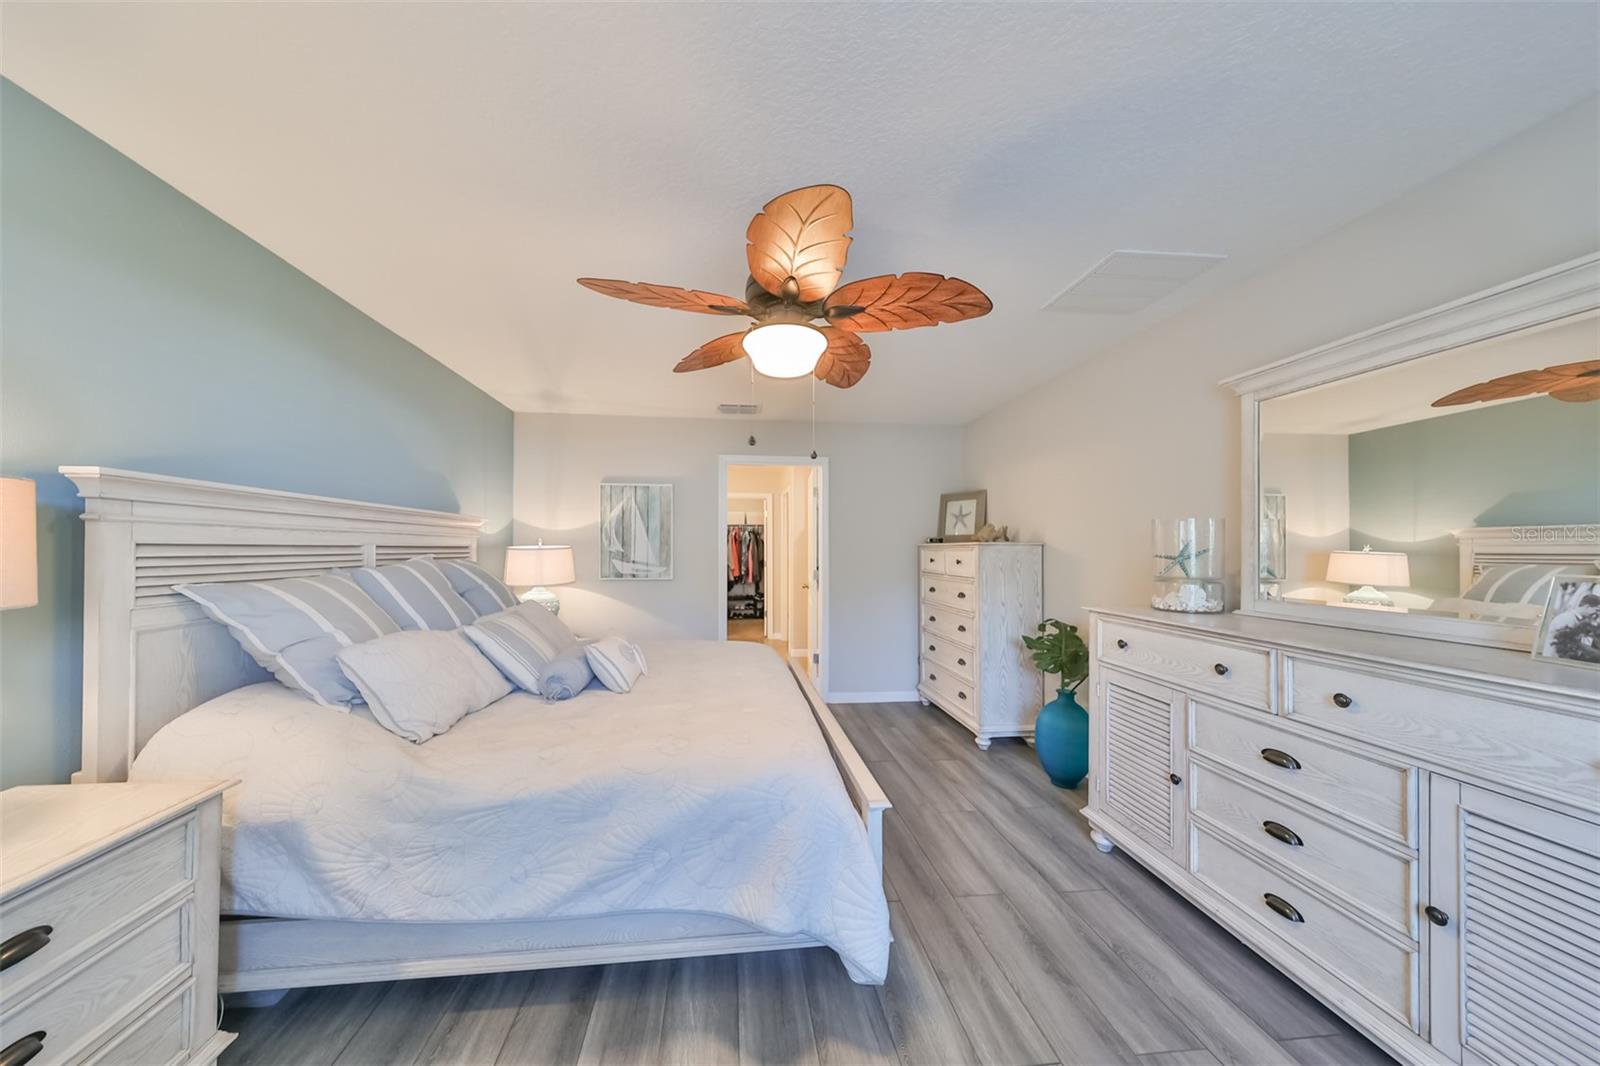 Soft, relaxing paint tones and custom ceiling fan just add to the ambiance.